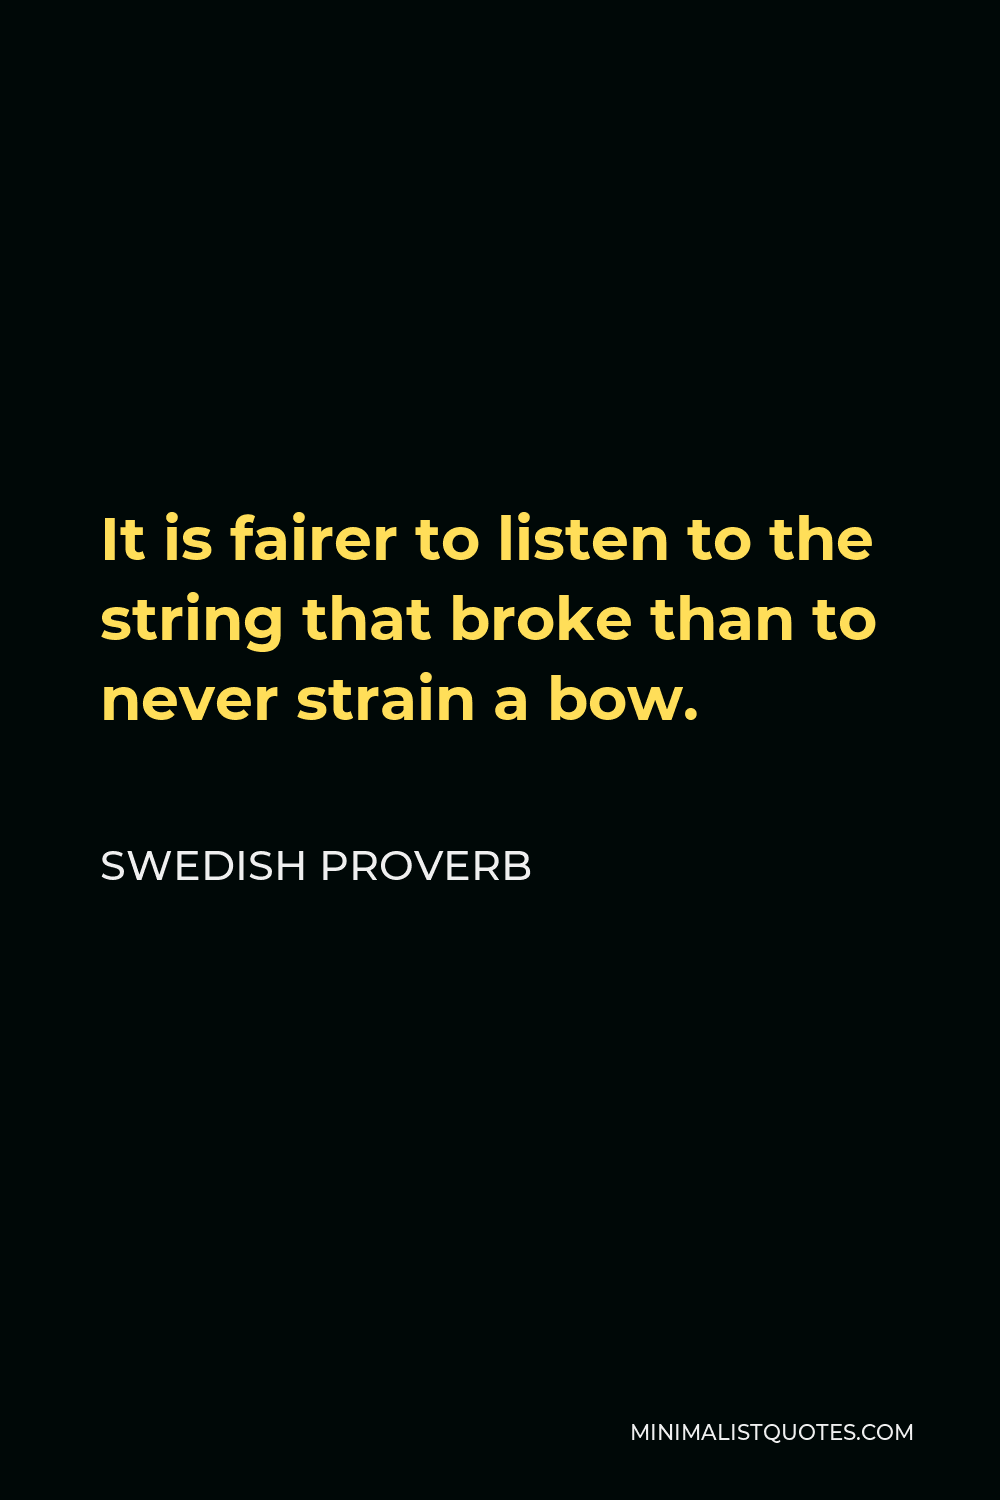 Swedish Proverb Quote - It is fairer to listen to the string that broke than to never strain a bow.